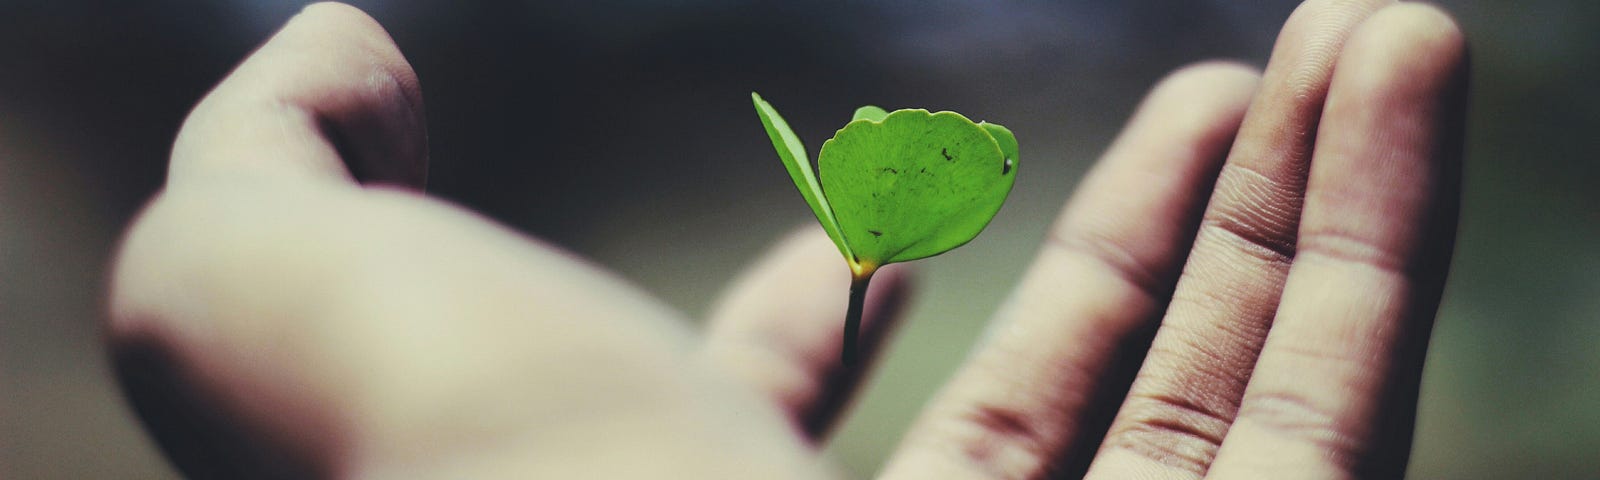 A human palm visible with a small leaf on its palm.